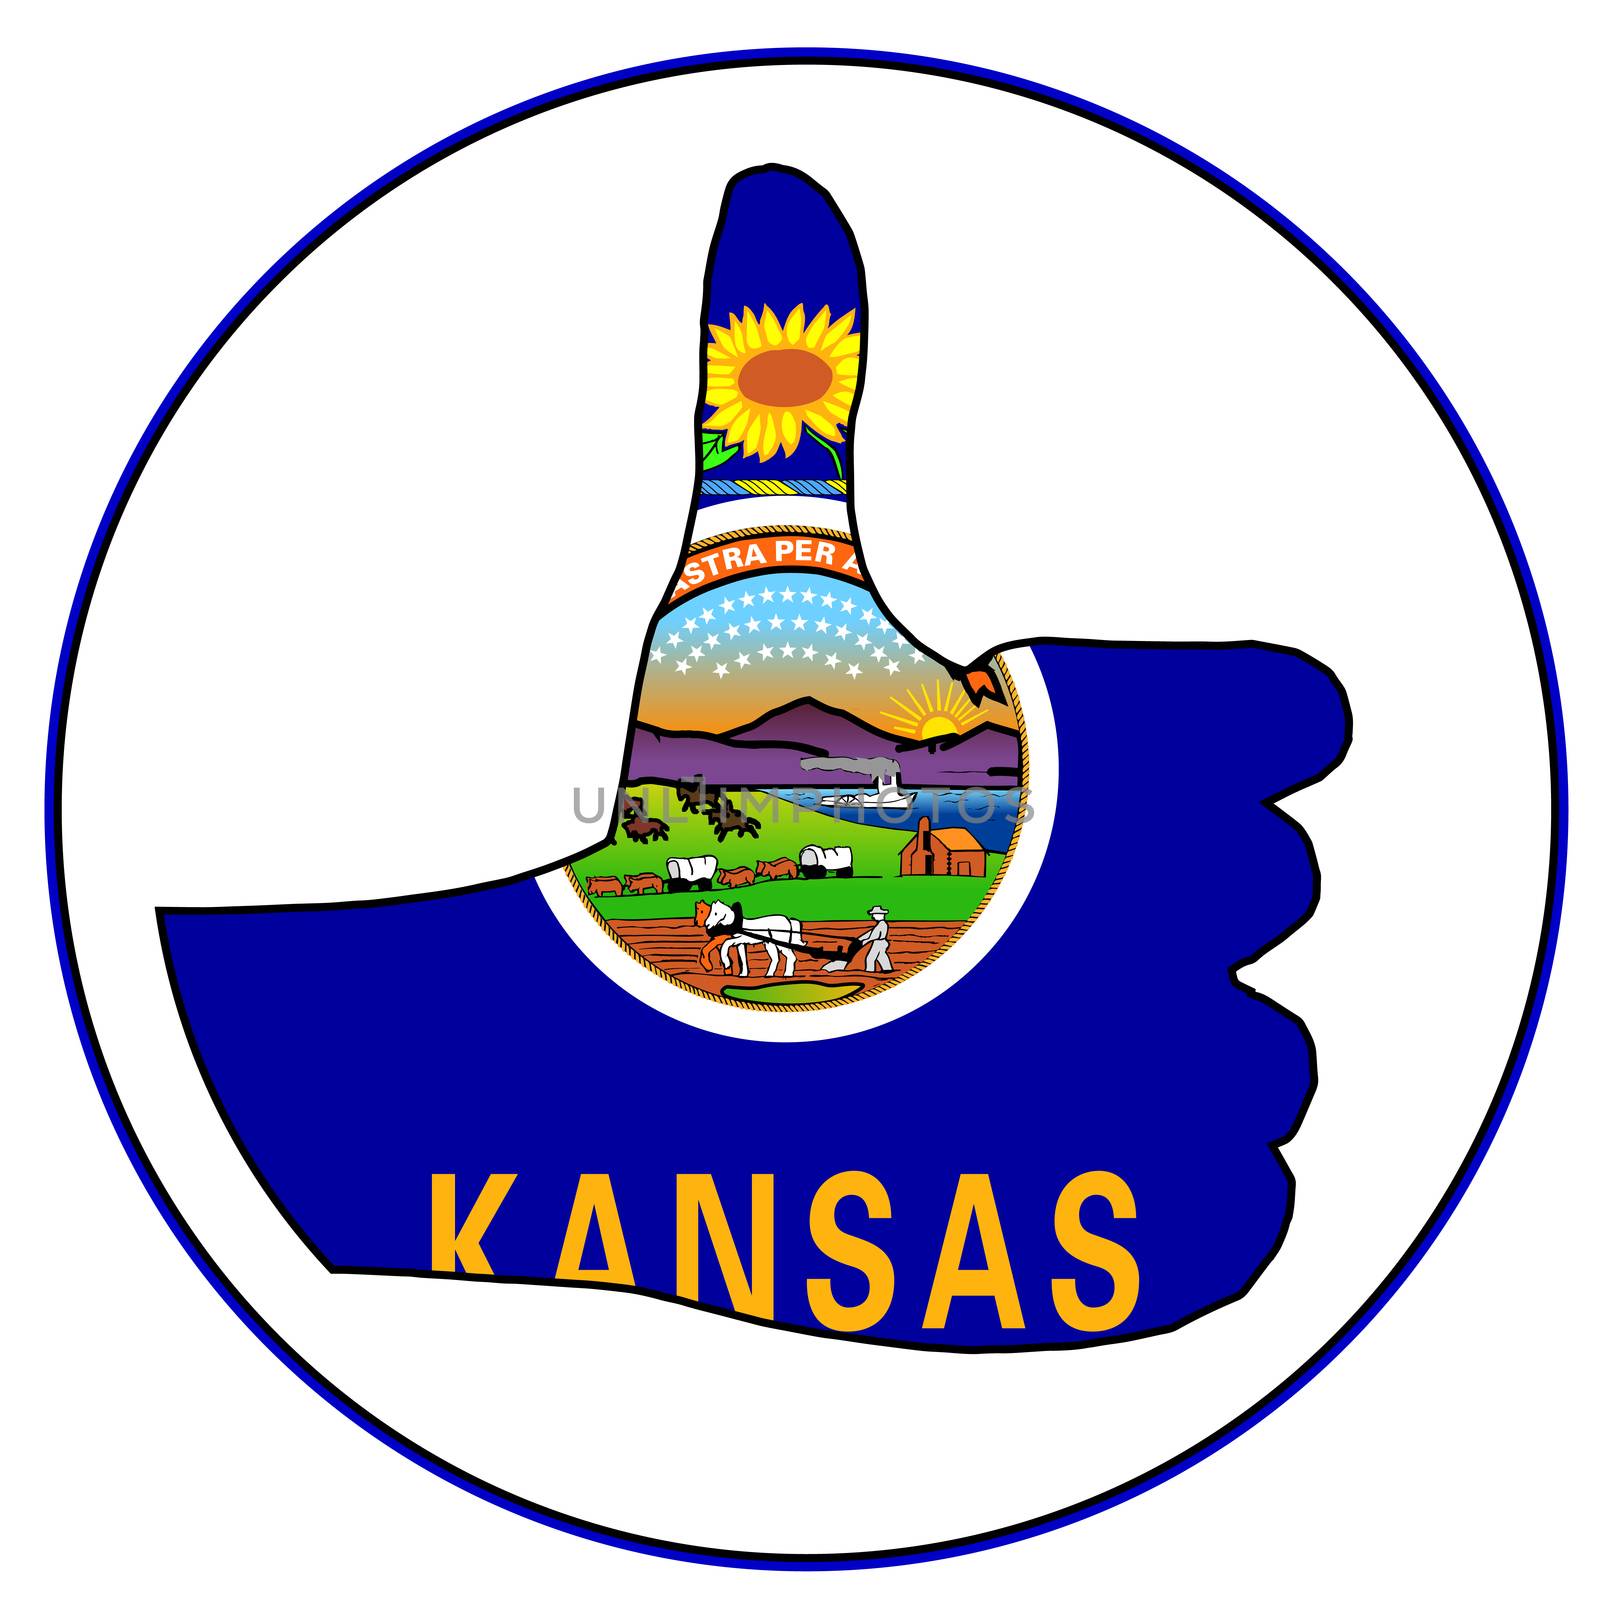 Kansas Flag hand giving the thumbs up sign all over a white background